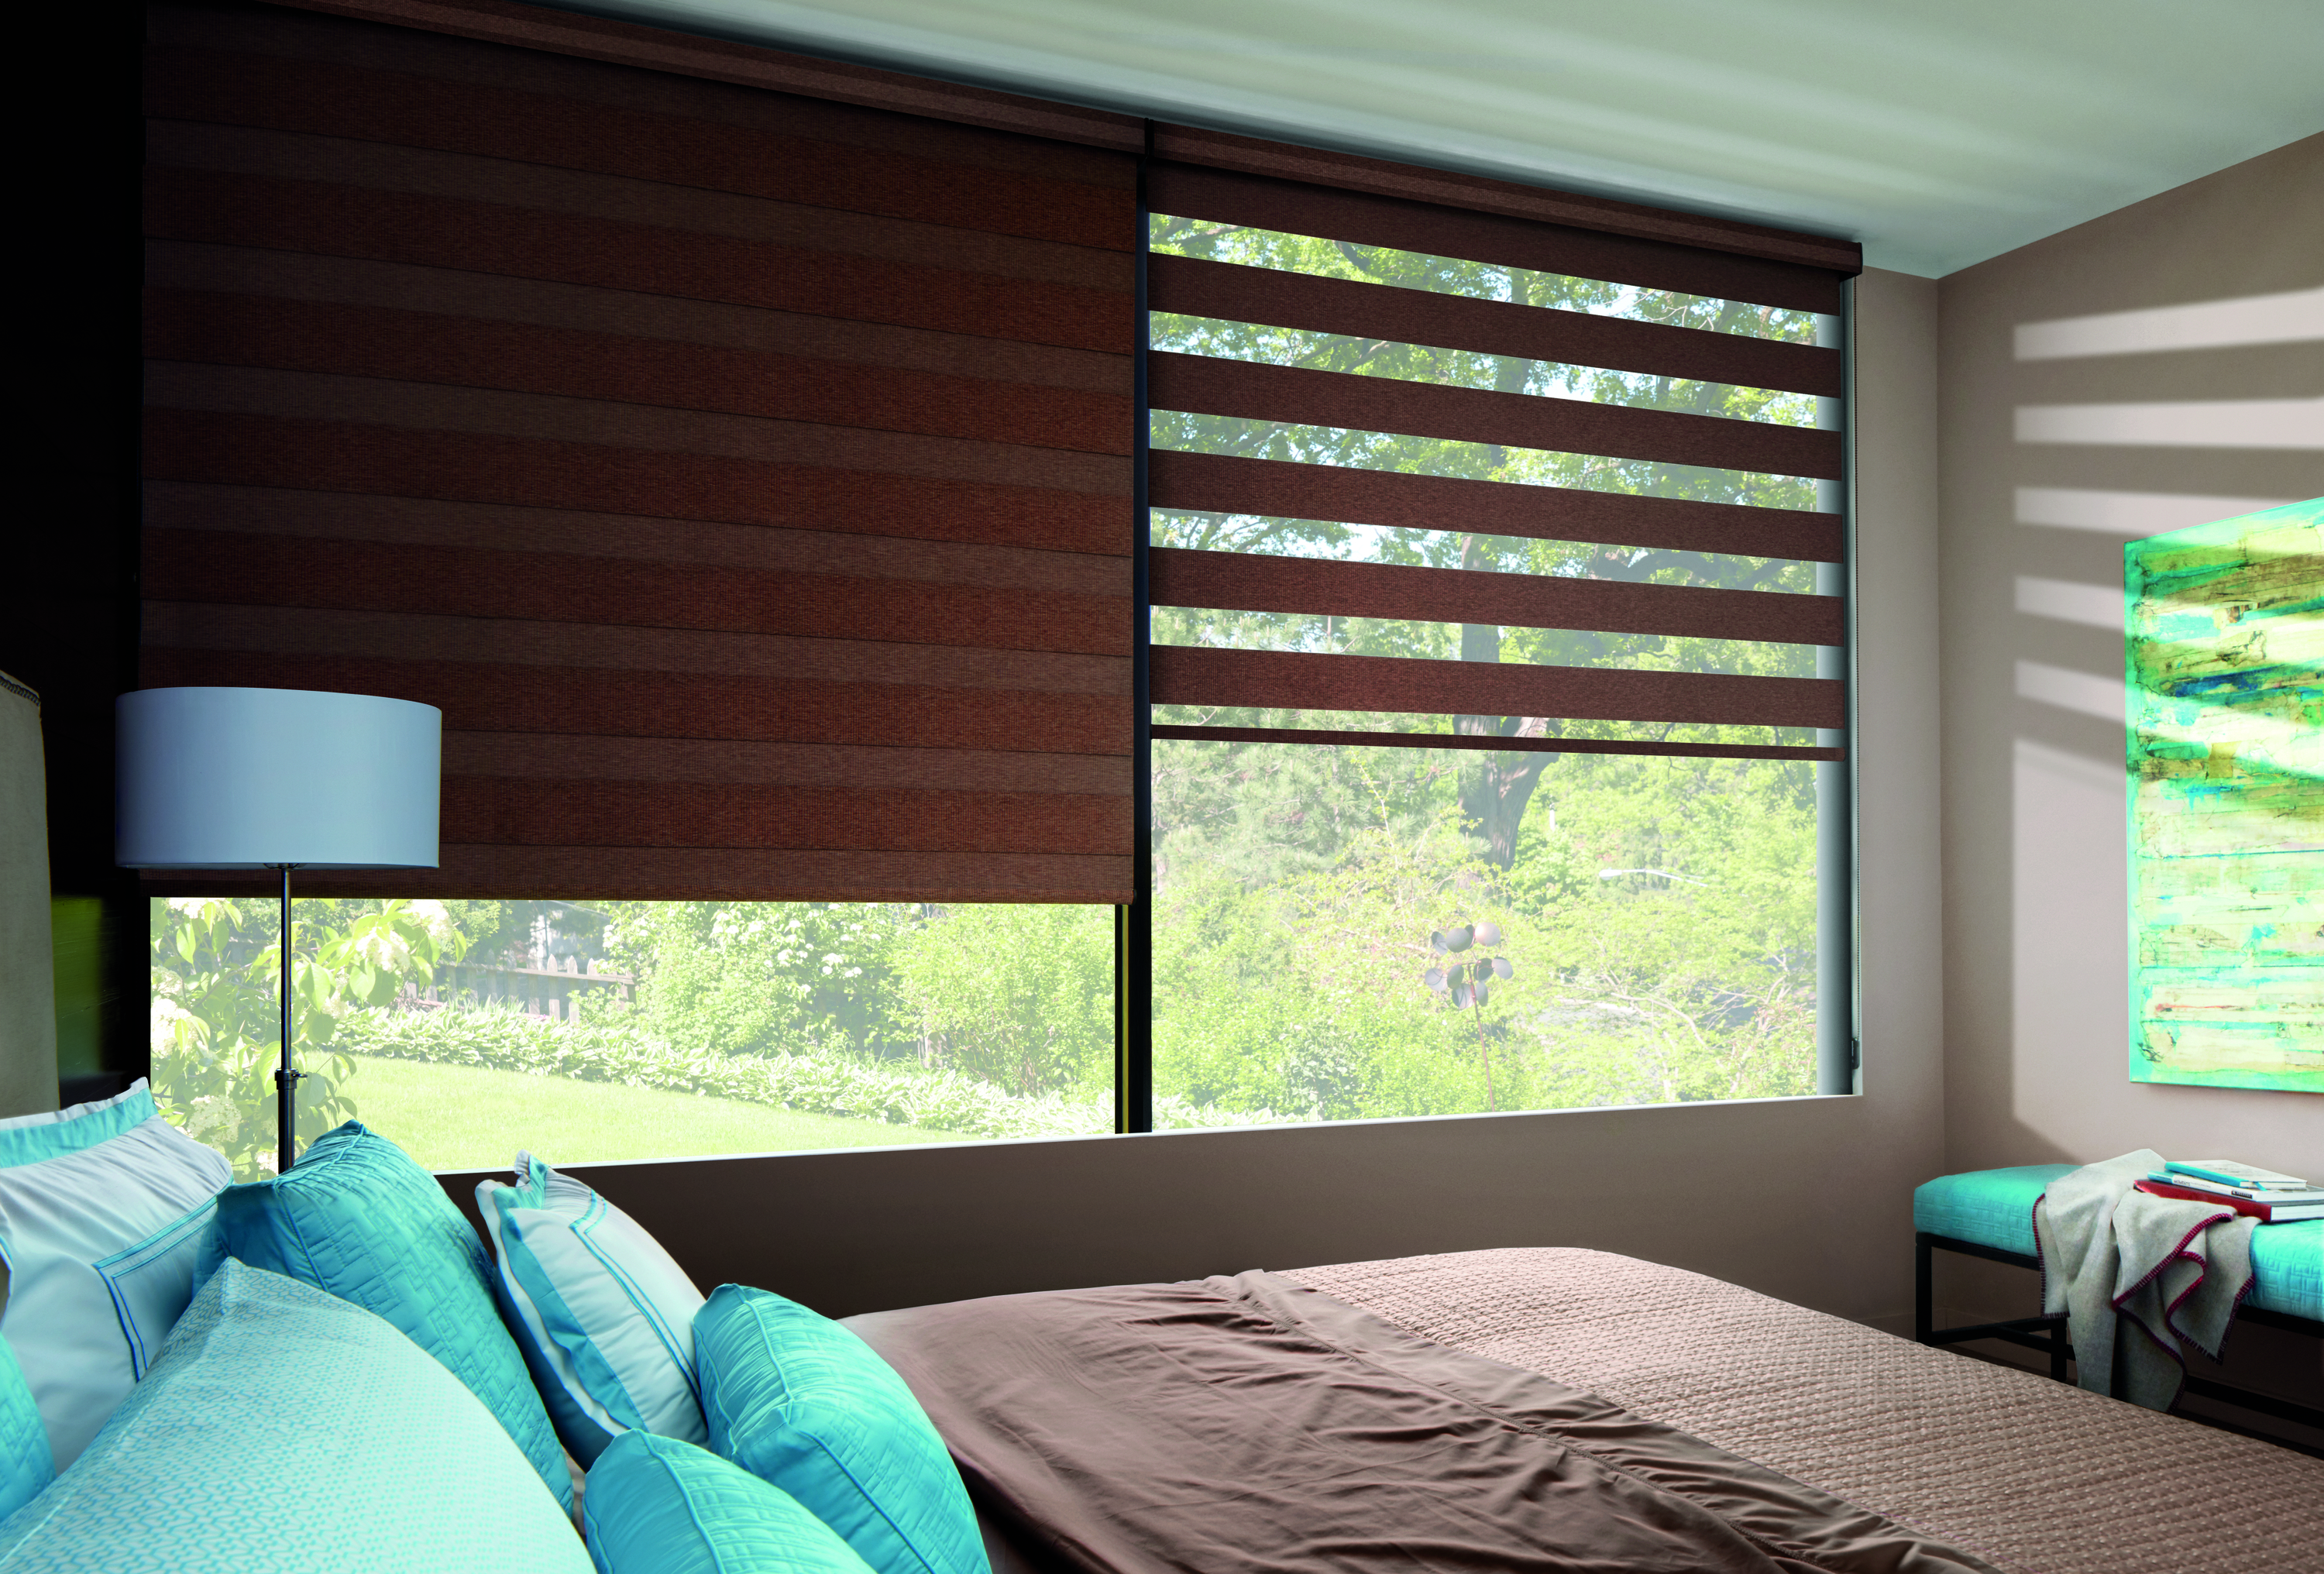 Designer Banded Shades open and closed in bedroom windows